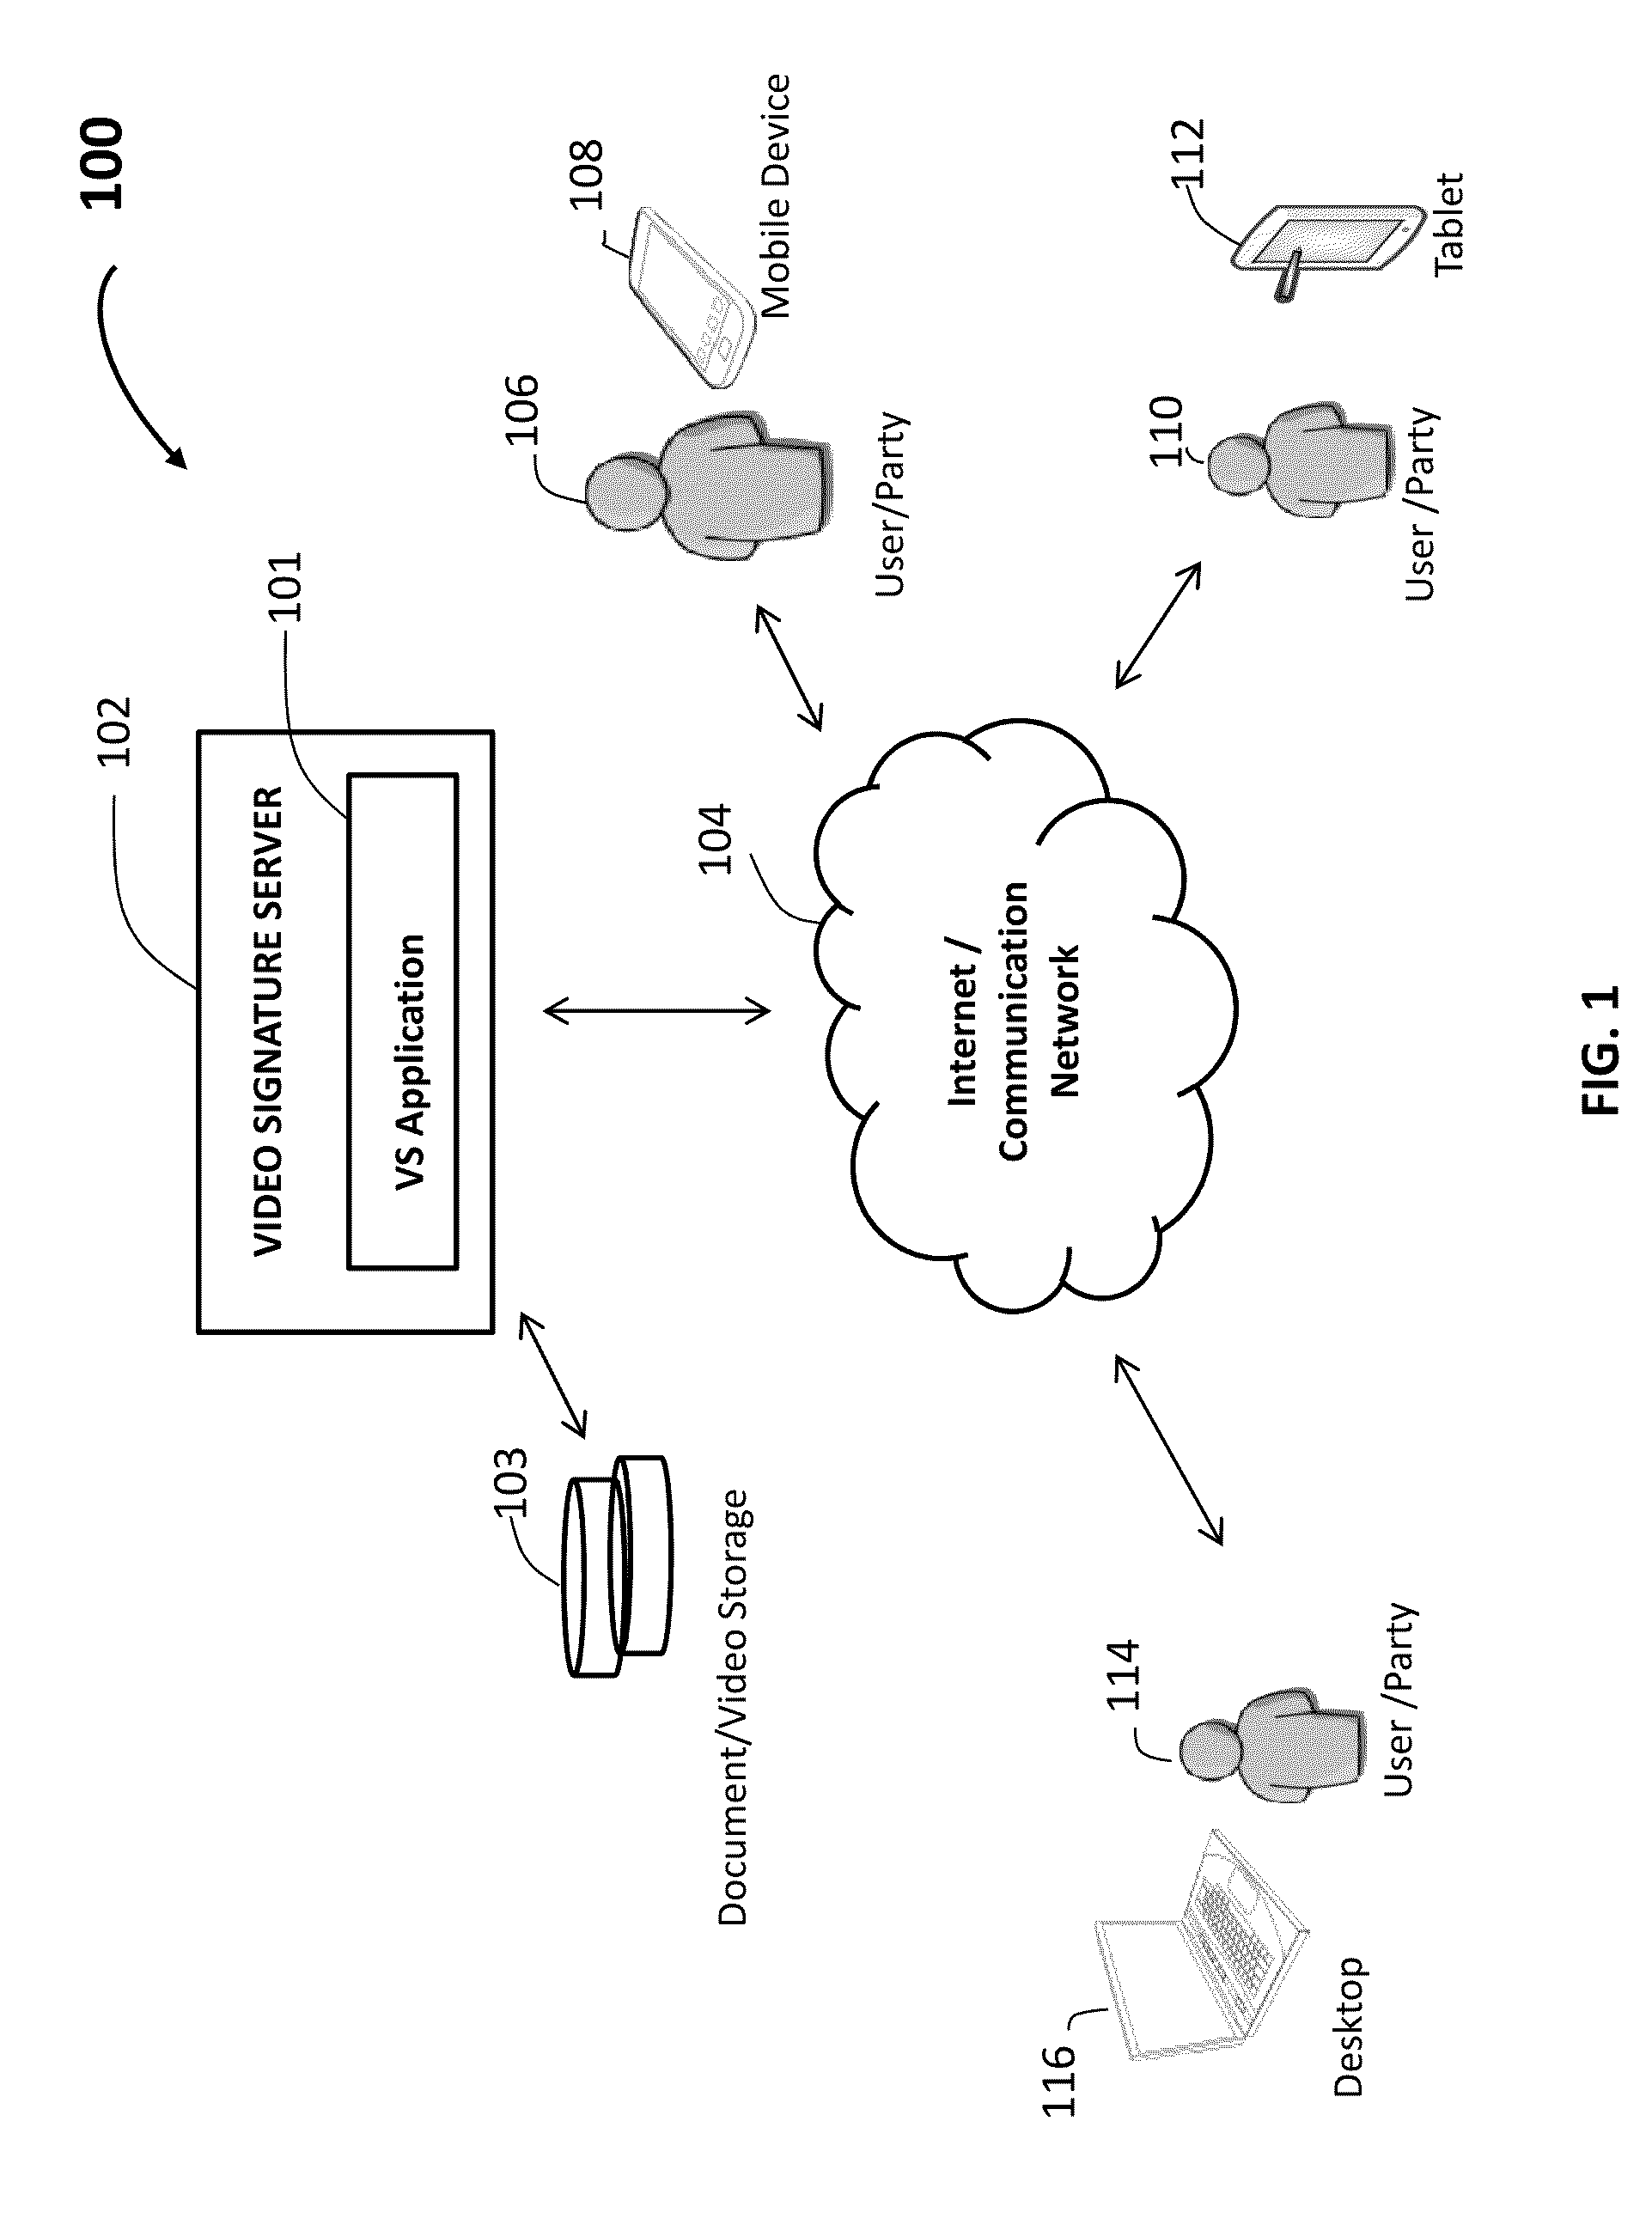 Video signature system and method